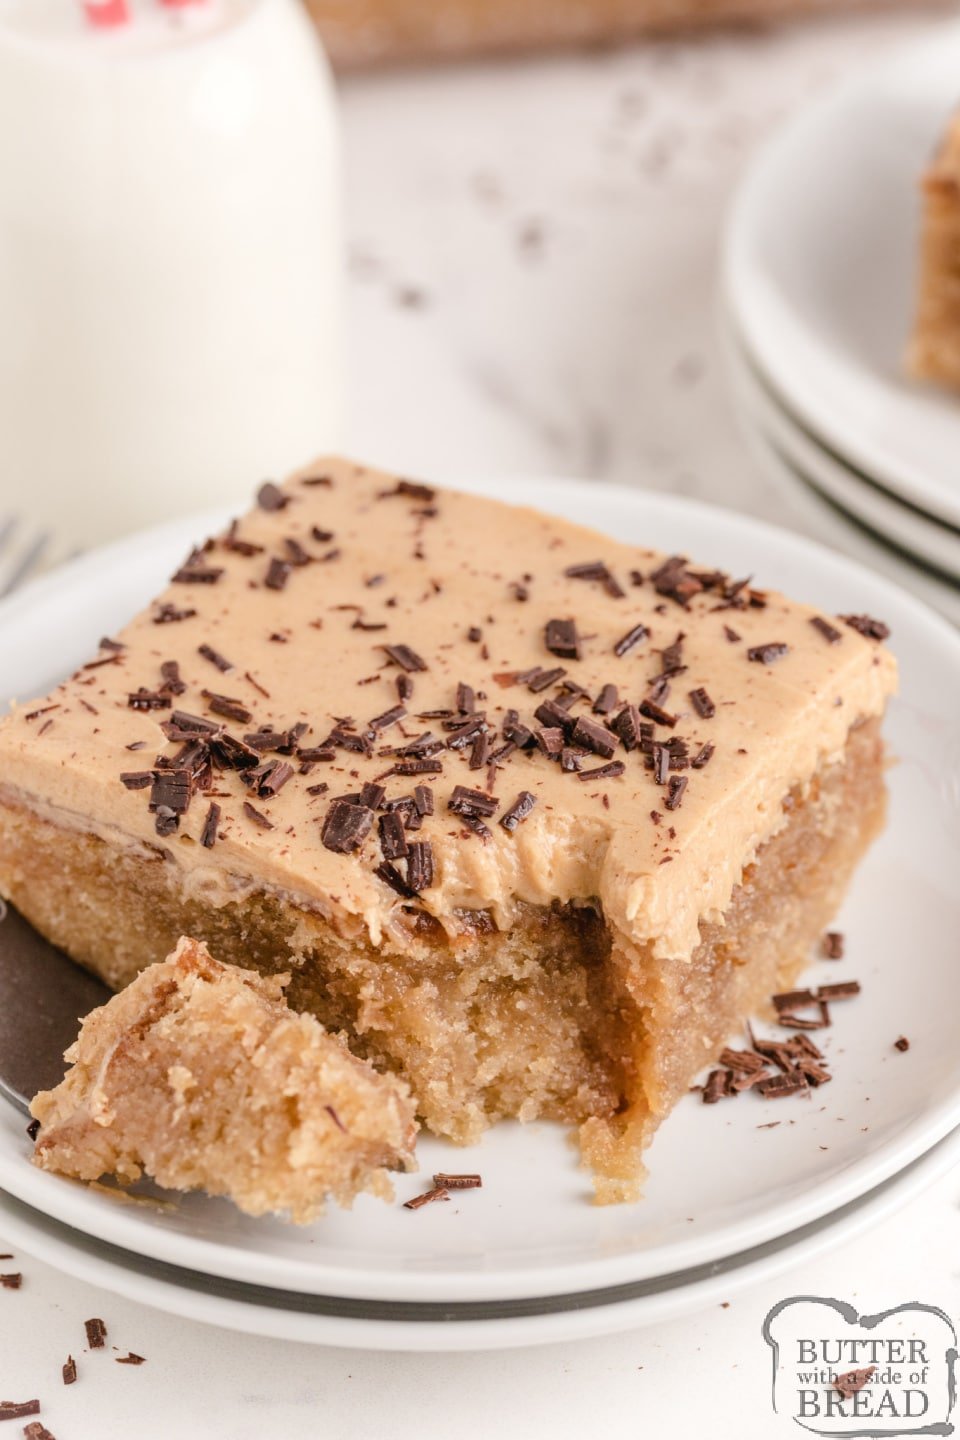 Peanut Butter Poke Cake made from scratch with a delicious peanut butter drizzle and a light peanut butter frosting on top! Tons of peanut butter flavor in this amazing poke cake recipe!